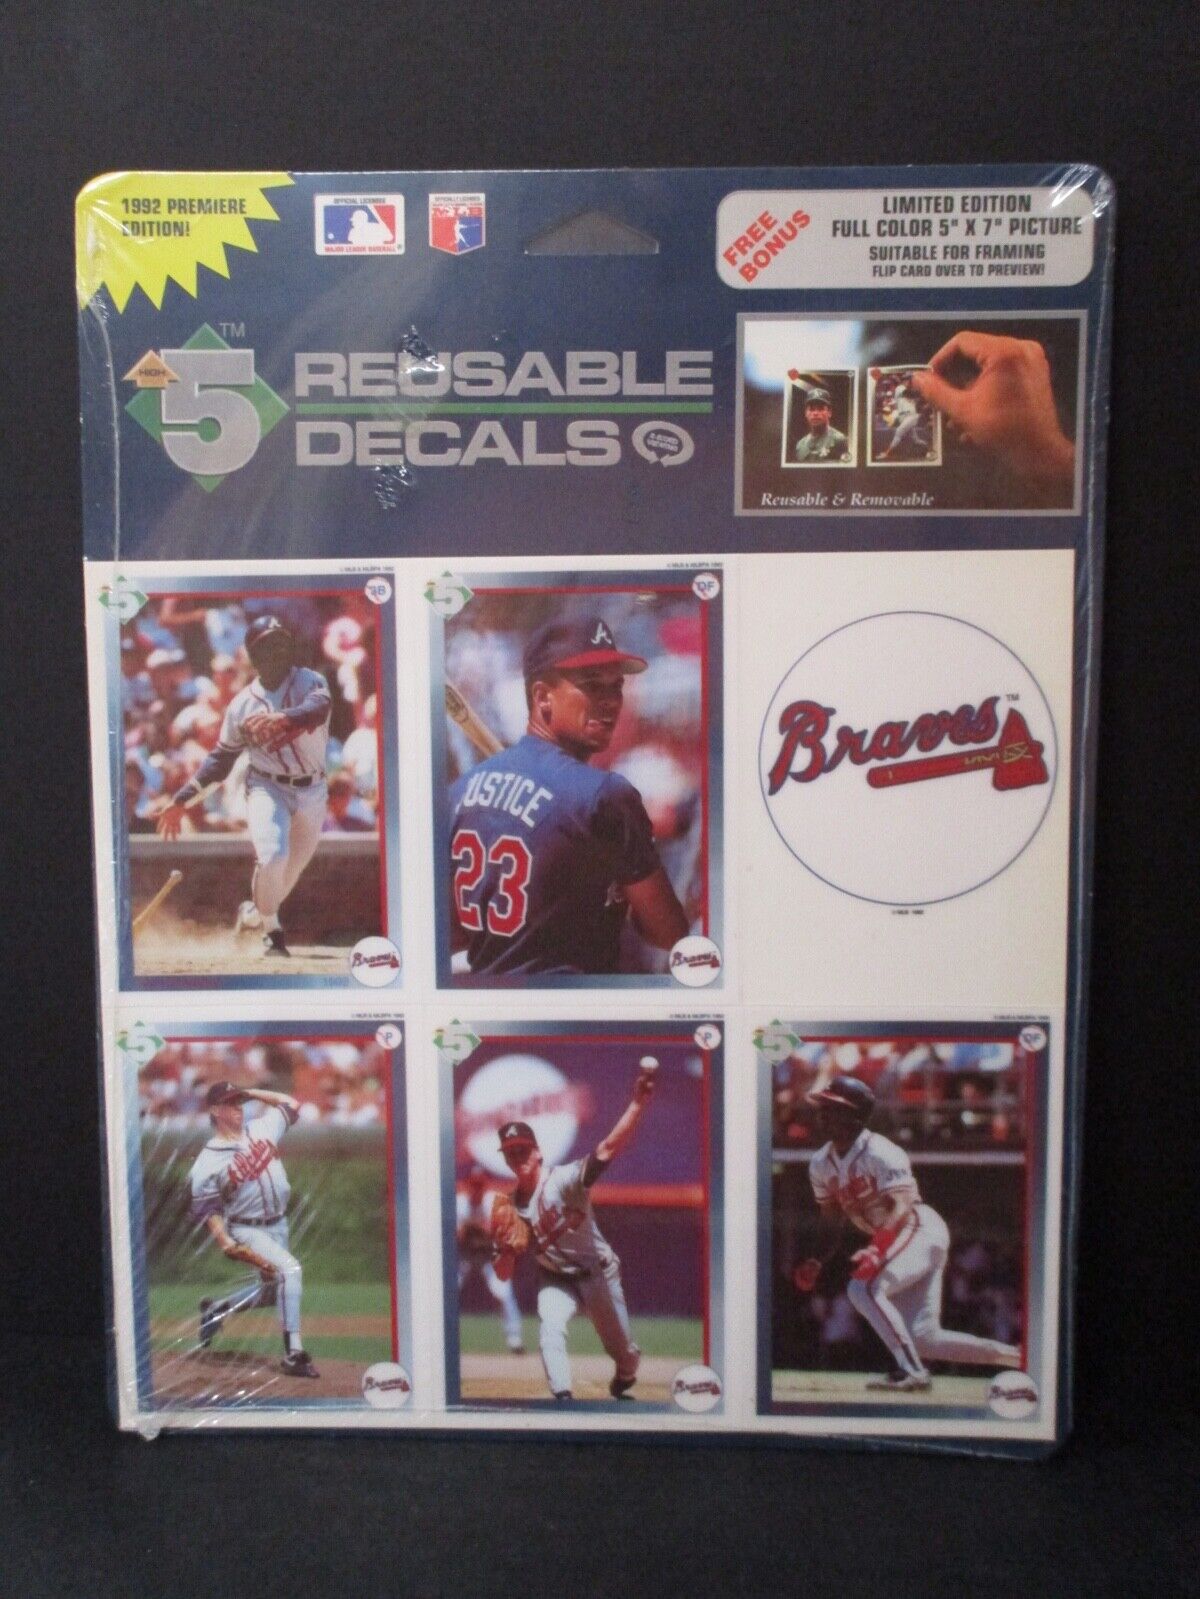 MLB 1992 Atlanta Braves 5 Reusable Decals High Five Justice Glavine New in Pack